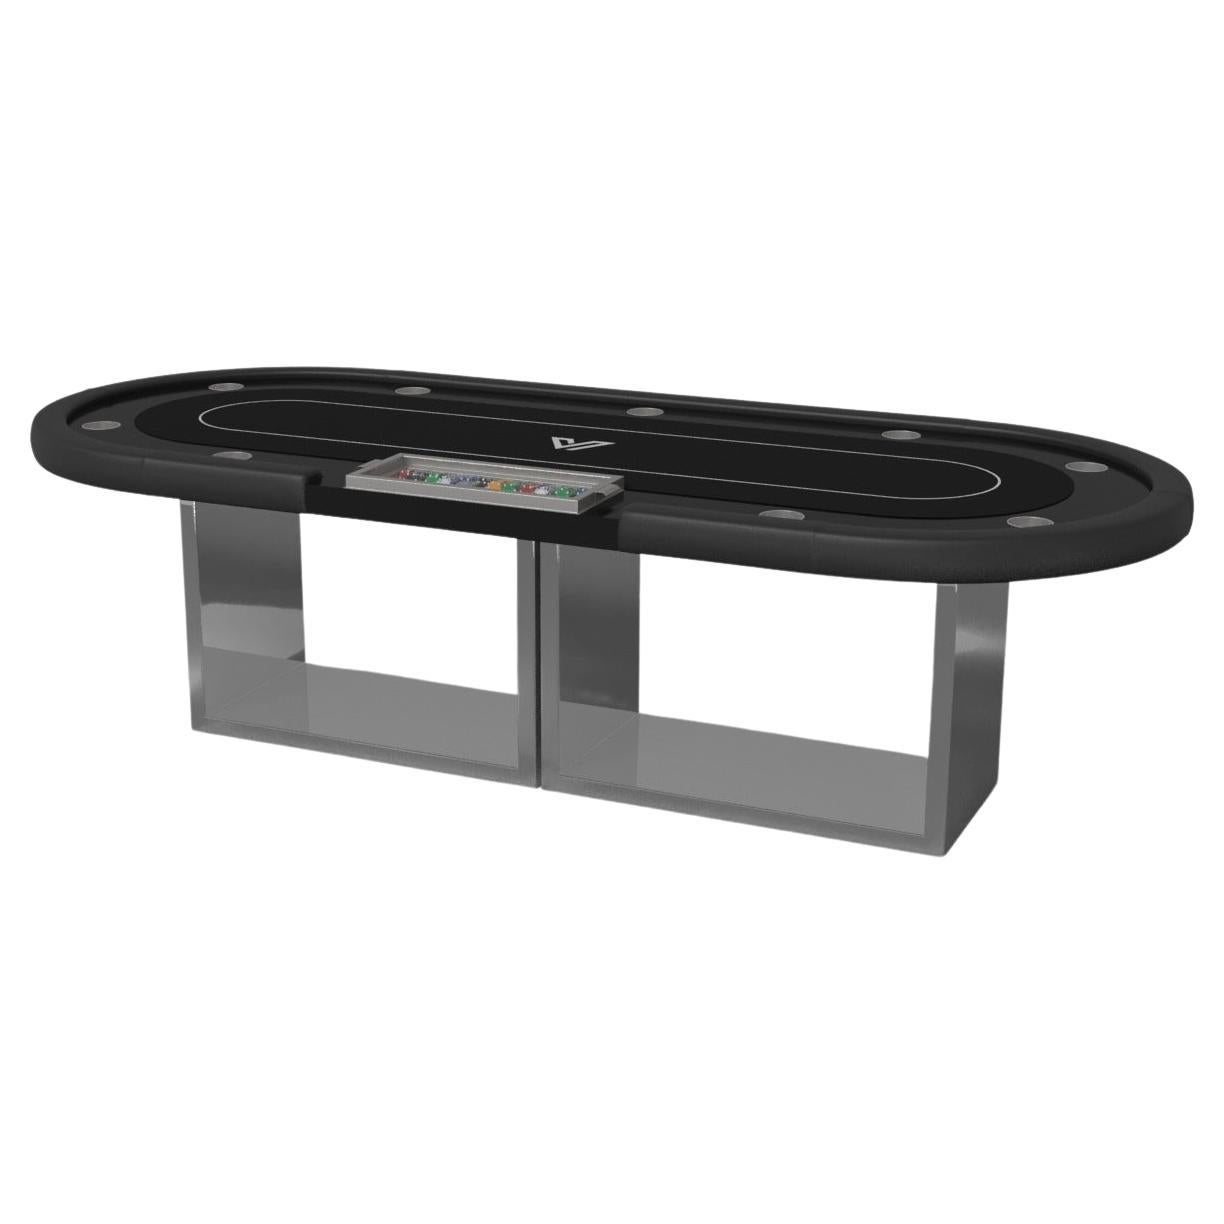 Elevate Customs Ambrosia Poker Tables / Stainless Steel Sheet Metal in 8'8" -USA For Sale